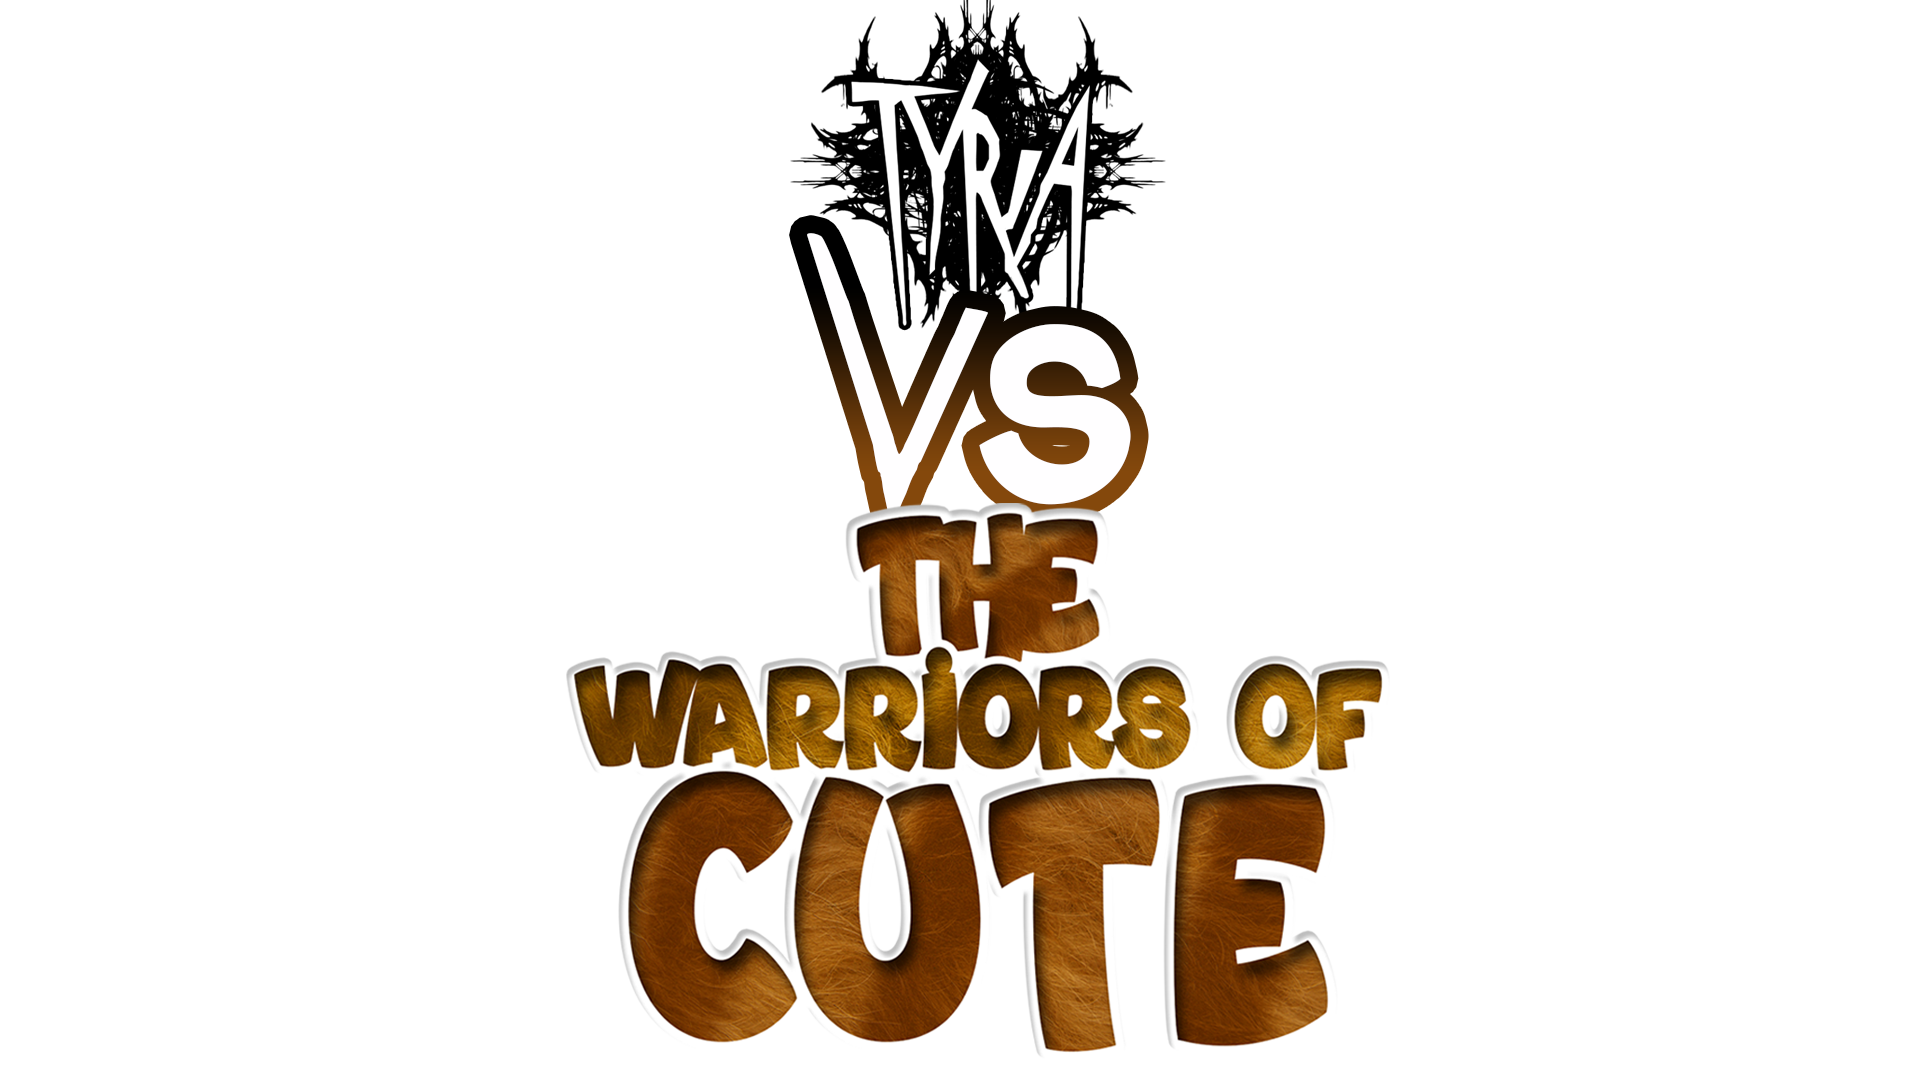 Tyria vs the Warriors of the Cute